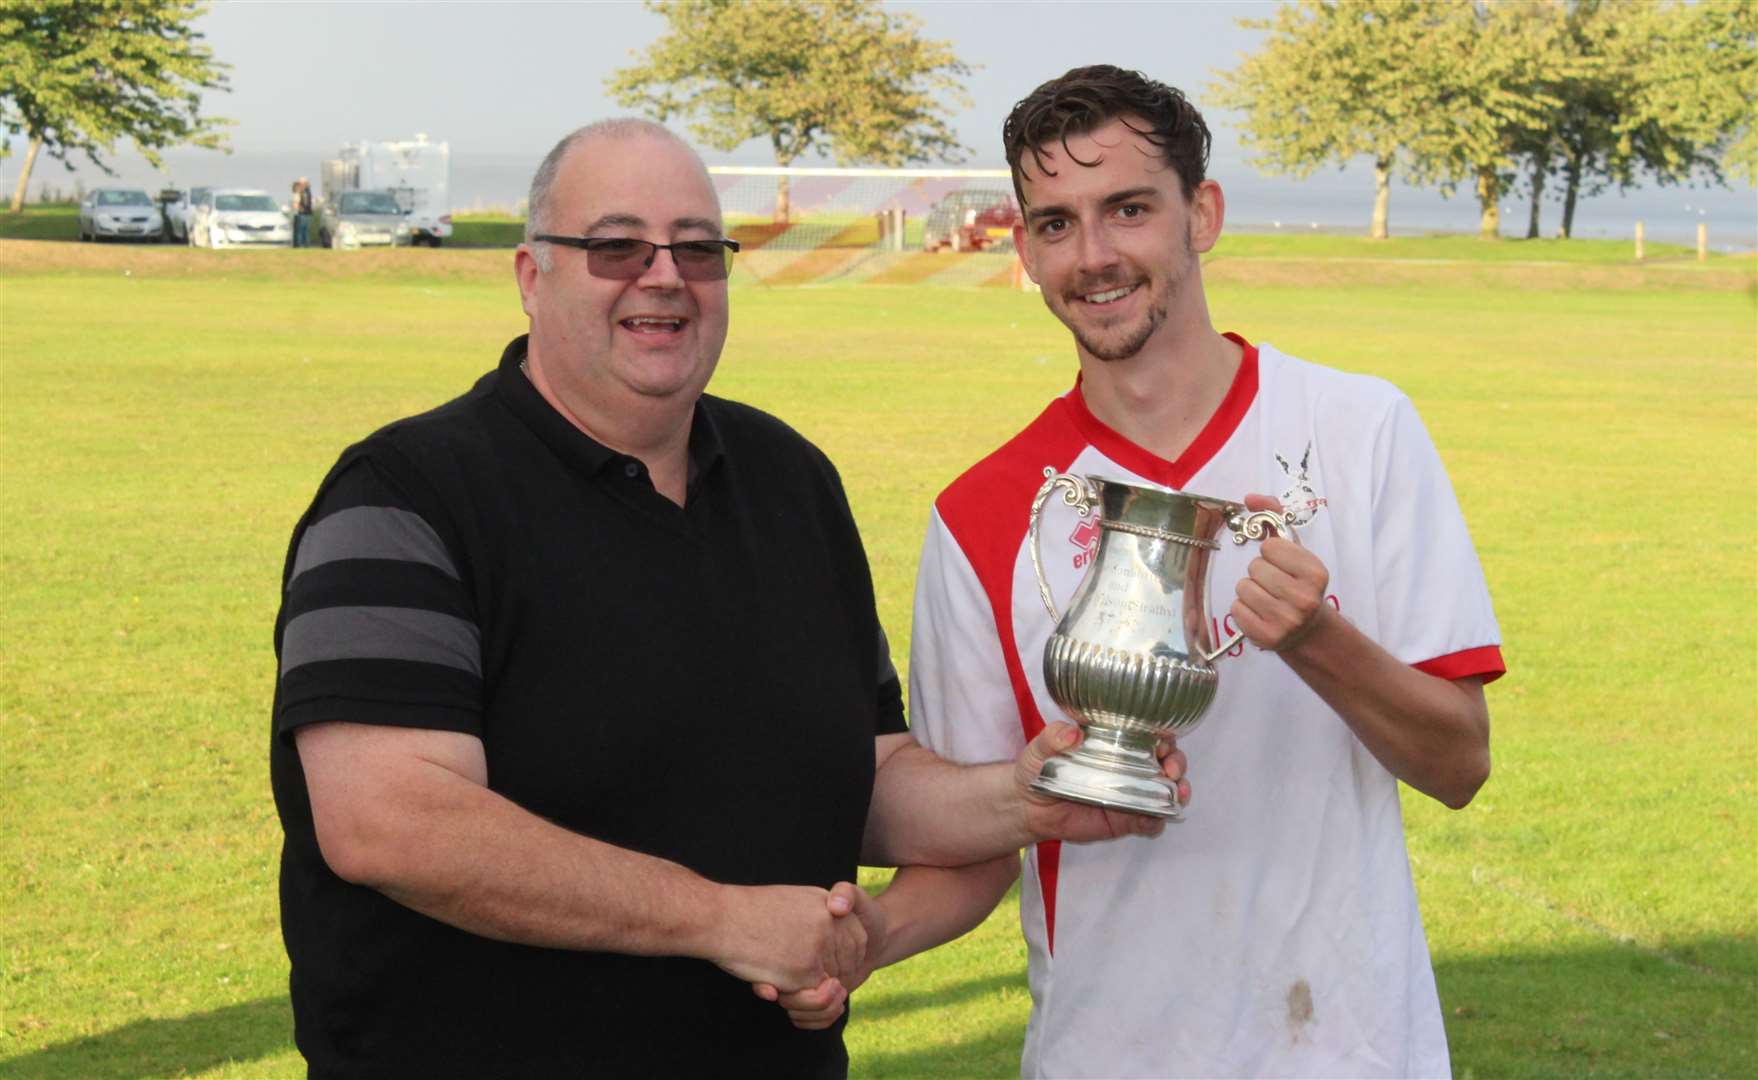 League secretary Hugh Morrison presents the league trophy to Tain Thistle player Darran Goller in 2019, the last time the league was played.